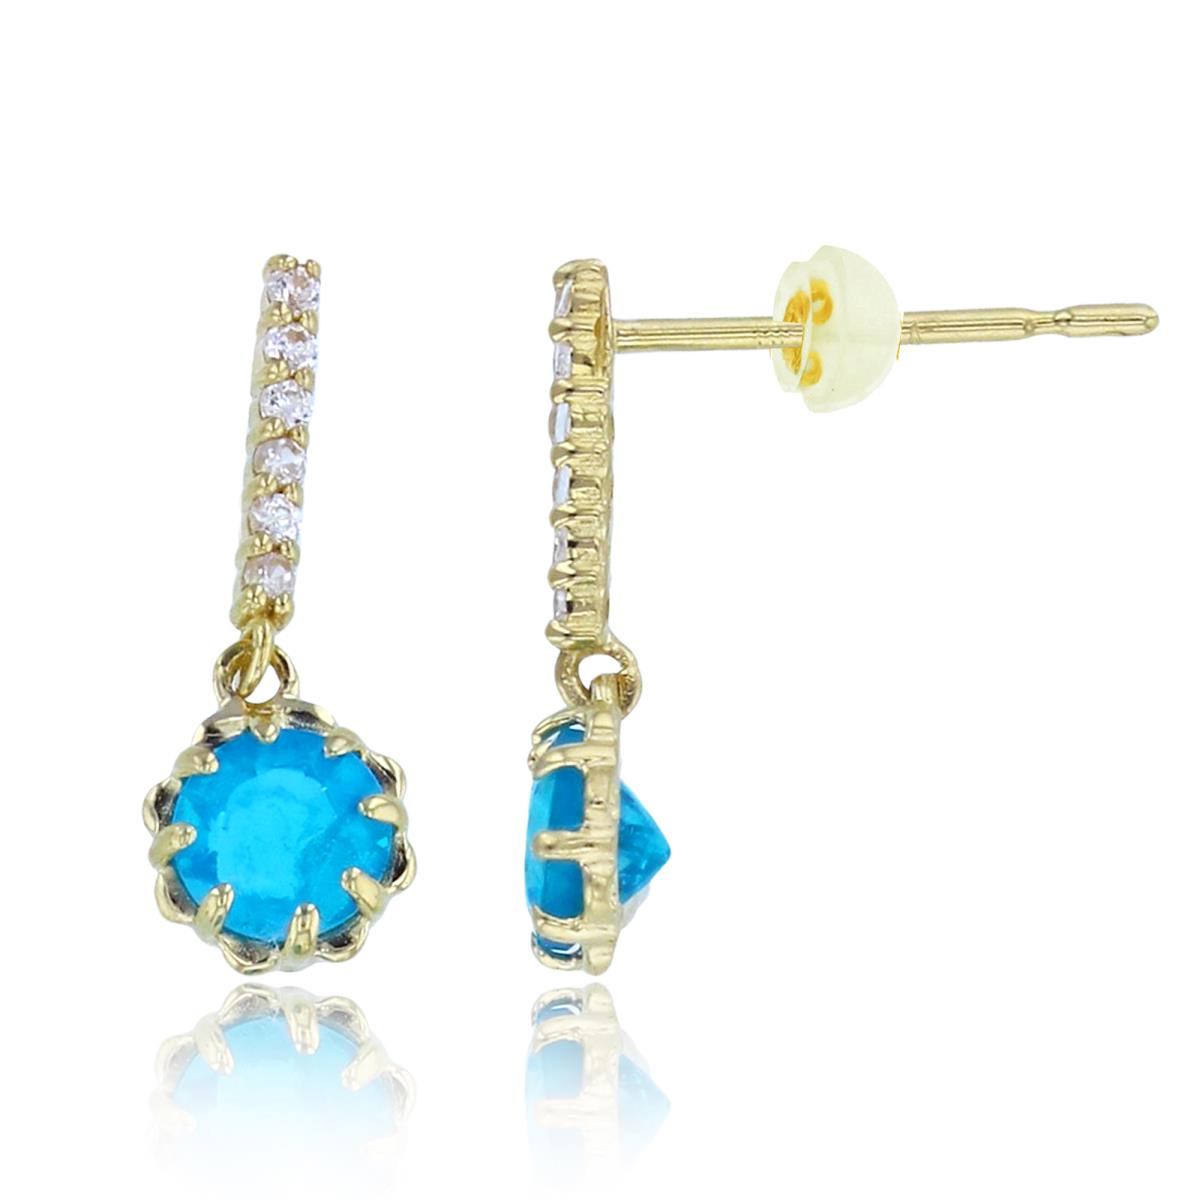 14K Yellow Gold 4mm Rnd Blue Apatite & Wh.Zircon Dangling Earrings with Silicon Backs